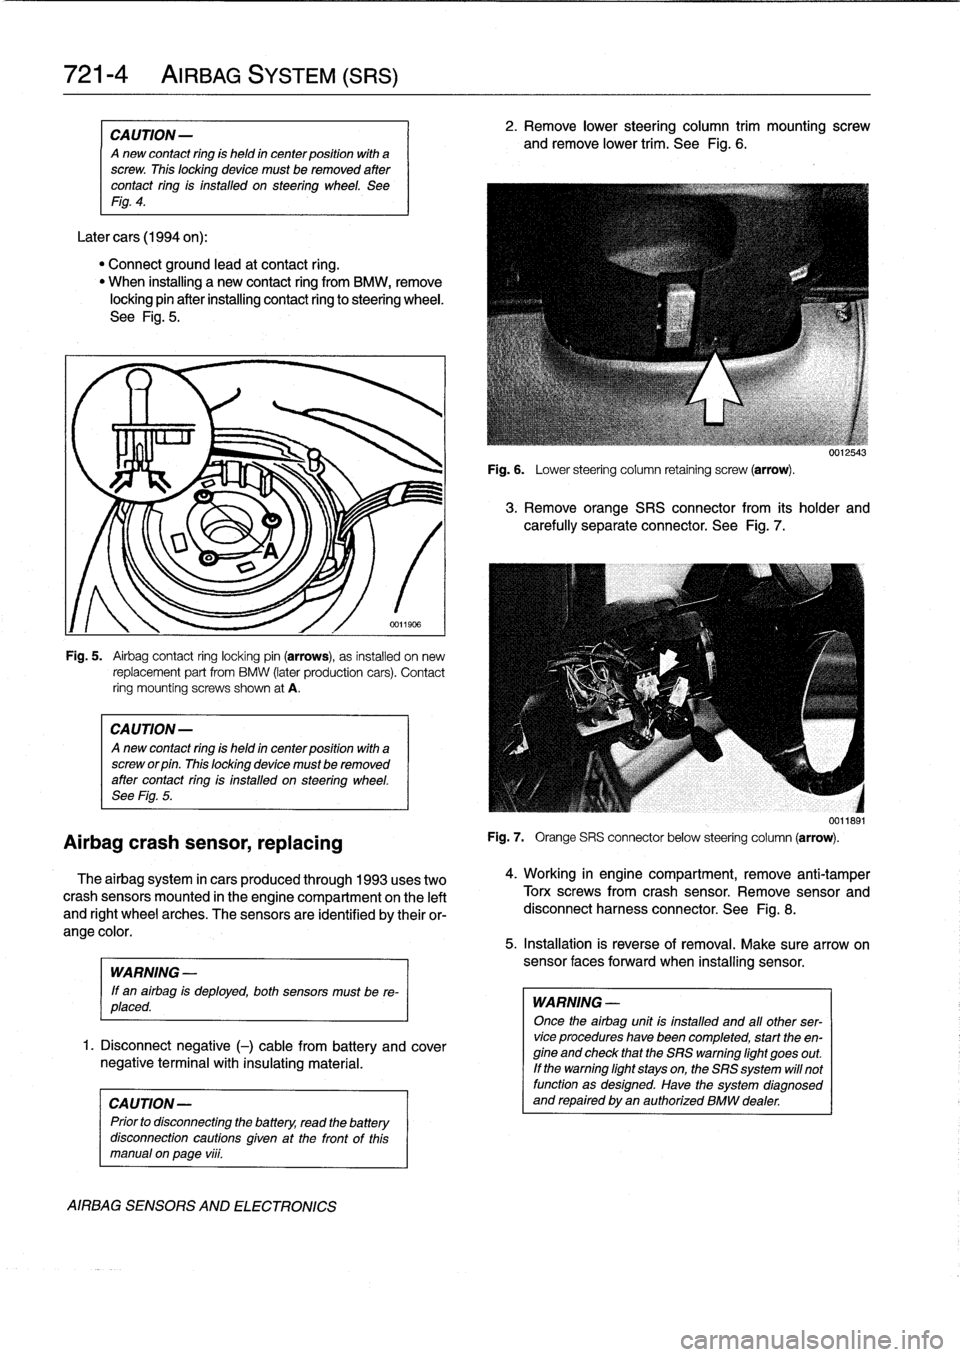 BMW 323i 1995 E36 Owners Manual 
721-
4

	

AIRBAG
SYSTEM
(SRS)

CAUTION-

A
new
contact
ring
is
held
in
center
position
with
a
screw
.
This
locking
device
must
be
removed
after
contact
ring
is
installed
on
steering
wheel
.
See
Fig
